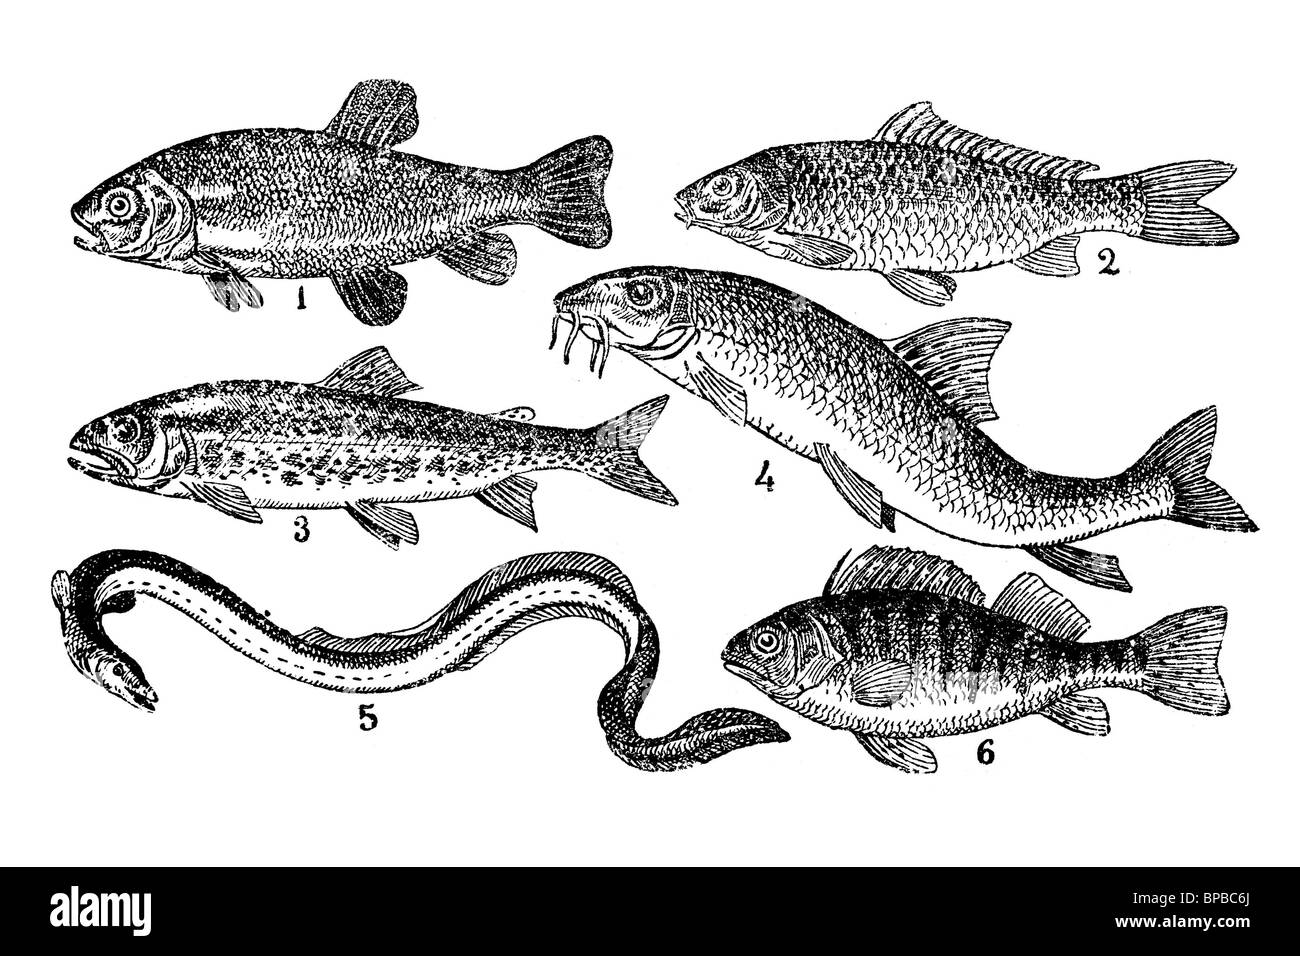 Fishes of river. Antique illustration. 1900. Stock Photo